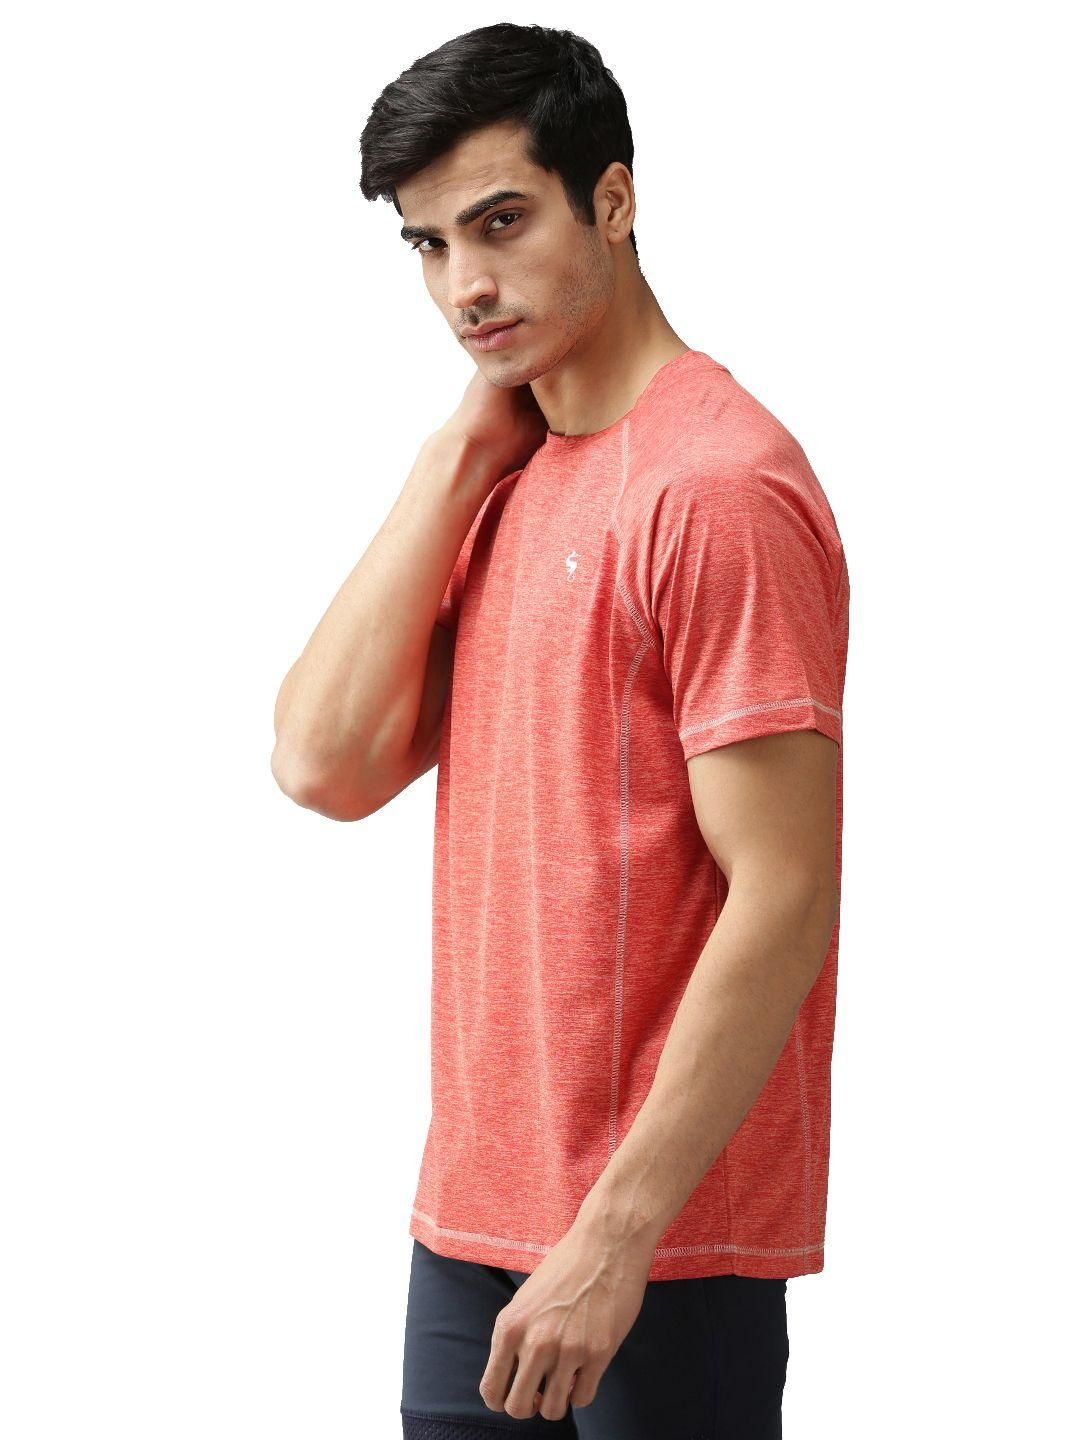 Micro polyester Texture Half Sleeves Dry-fit T-Shirt